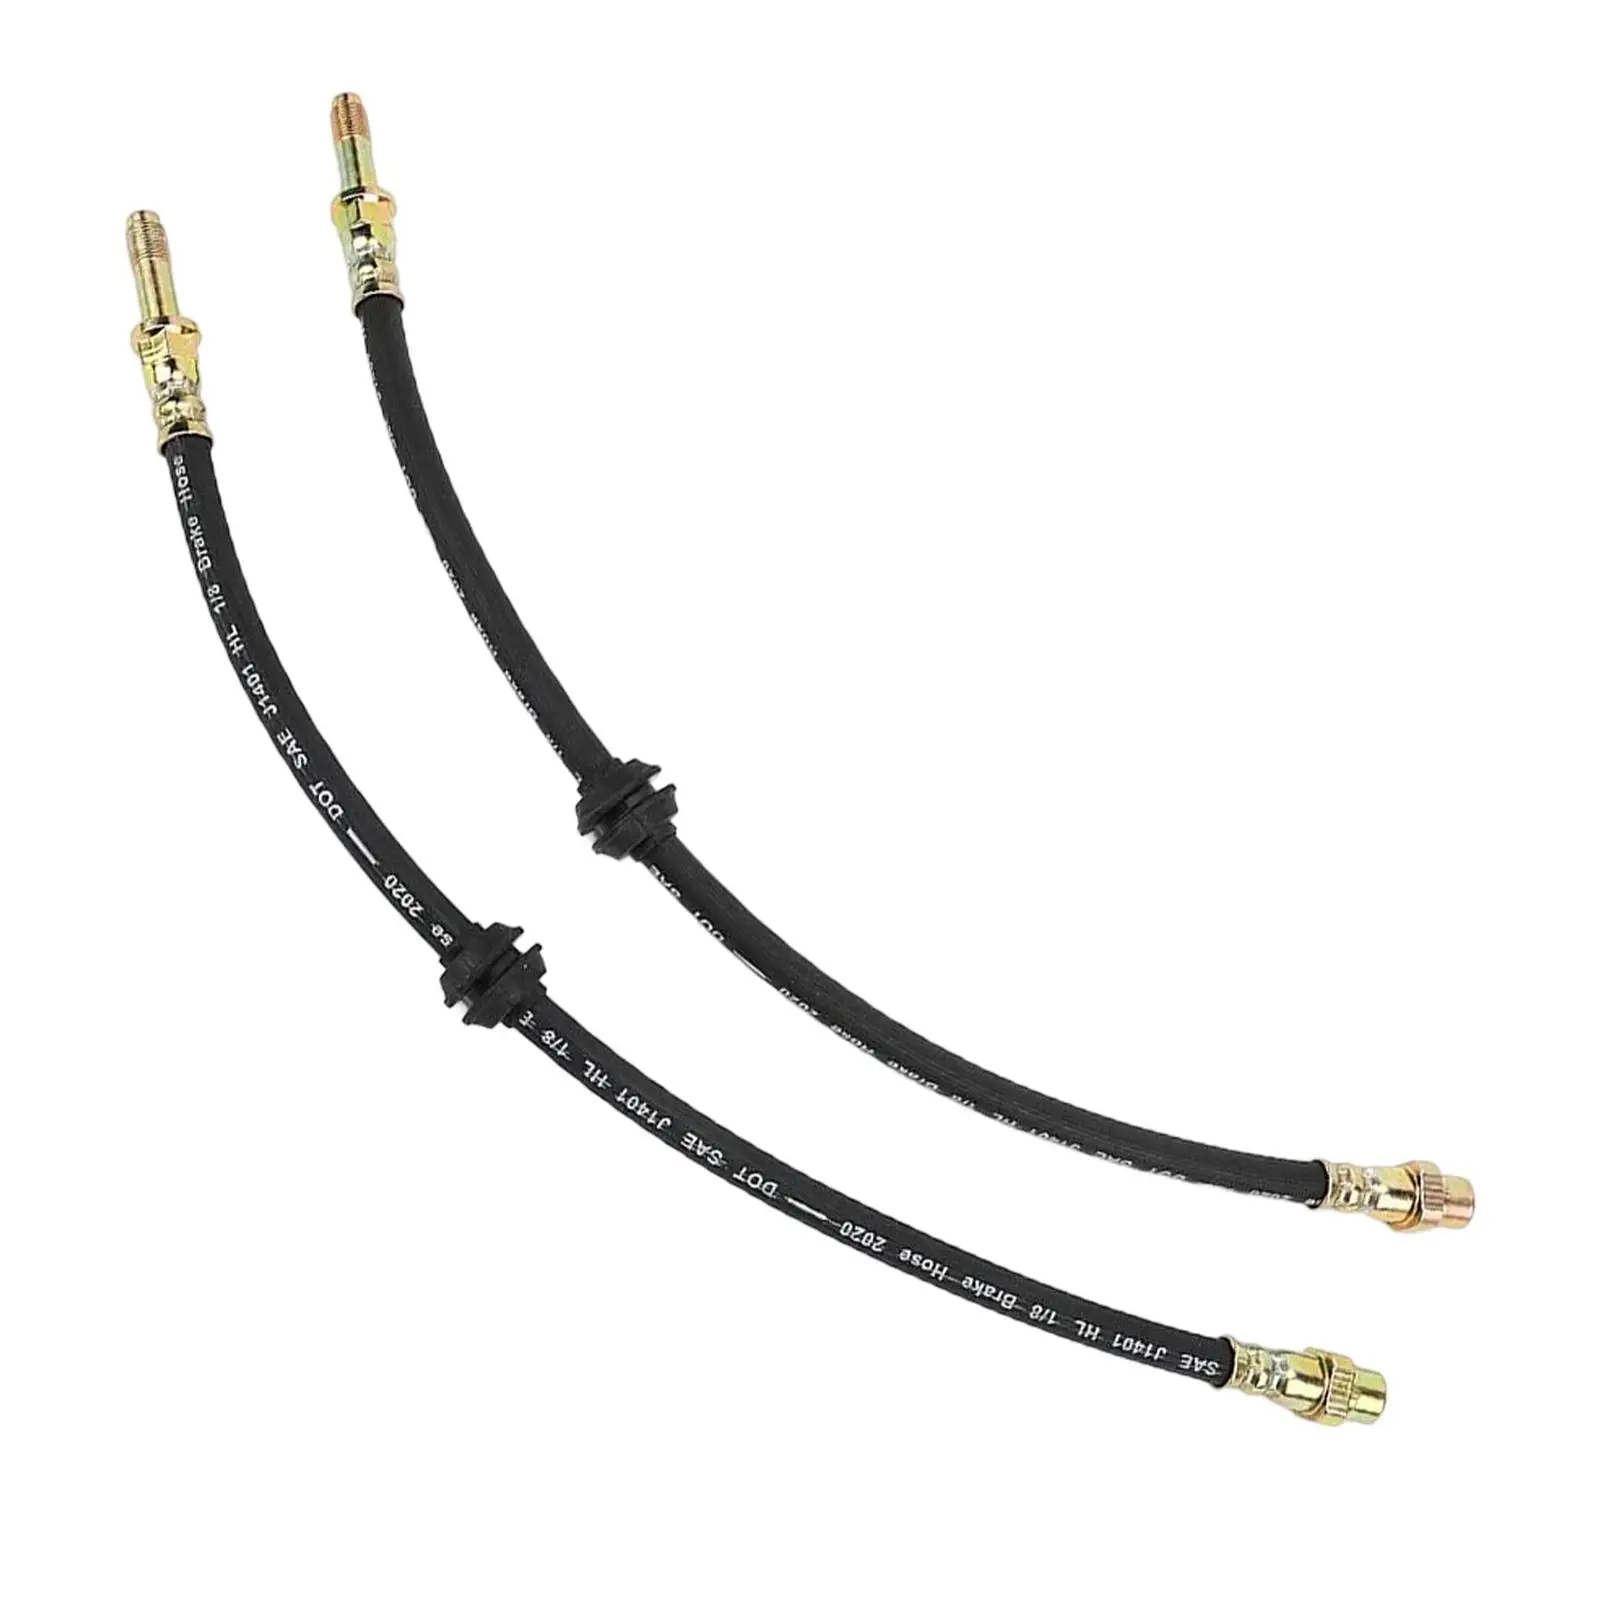 2x Durable Brake Hose Line Easy Installation Vehicle 34321165587 34326766966 for BMW 3er (E46) Z4 E85 Direct Replaces Parts